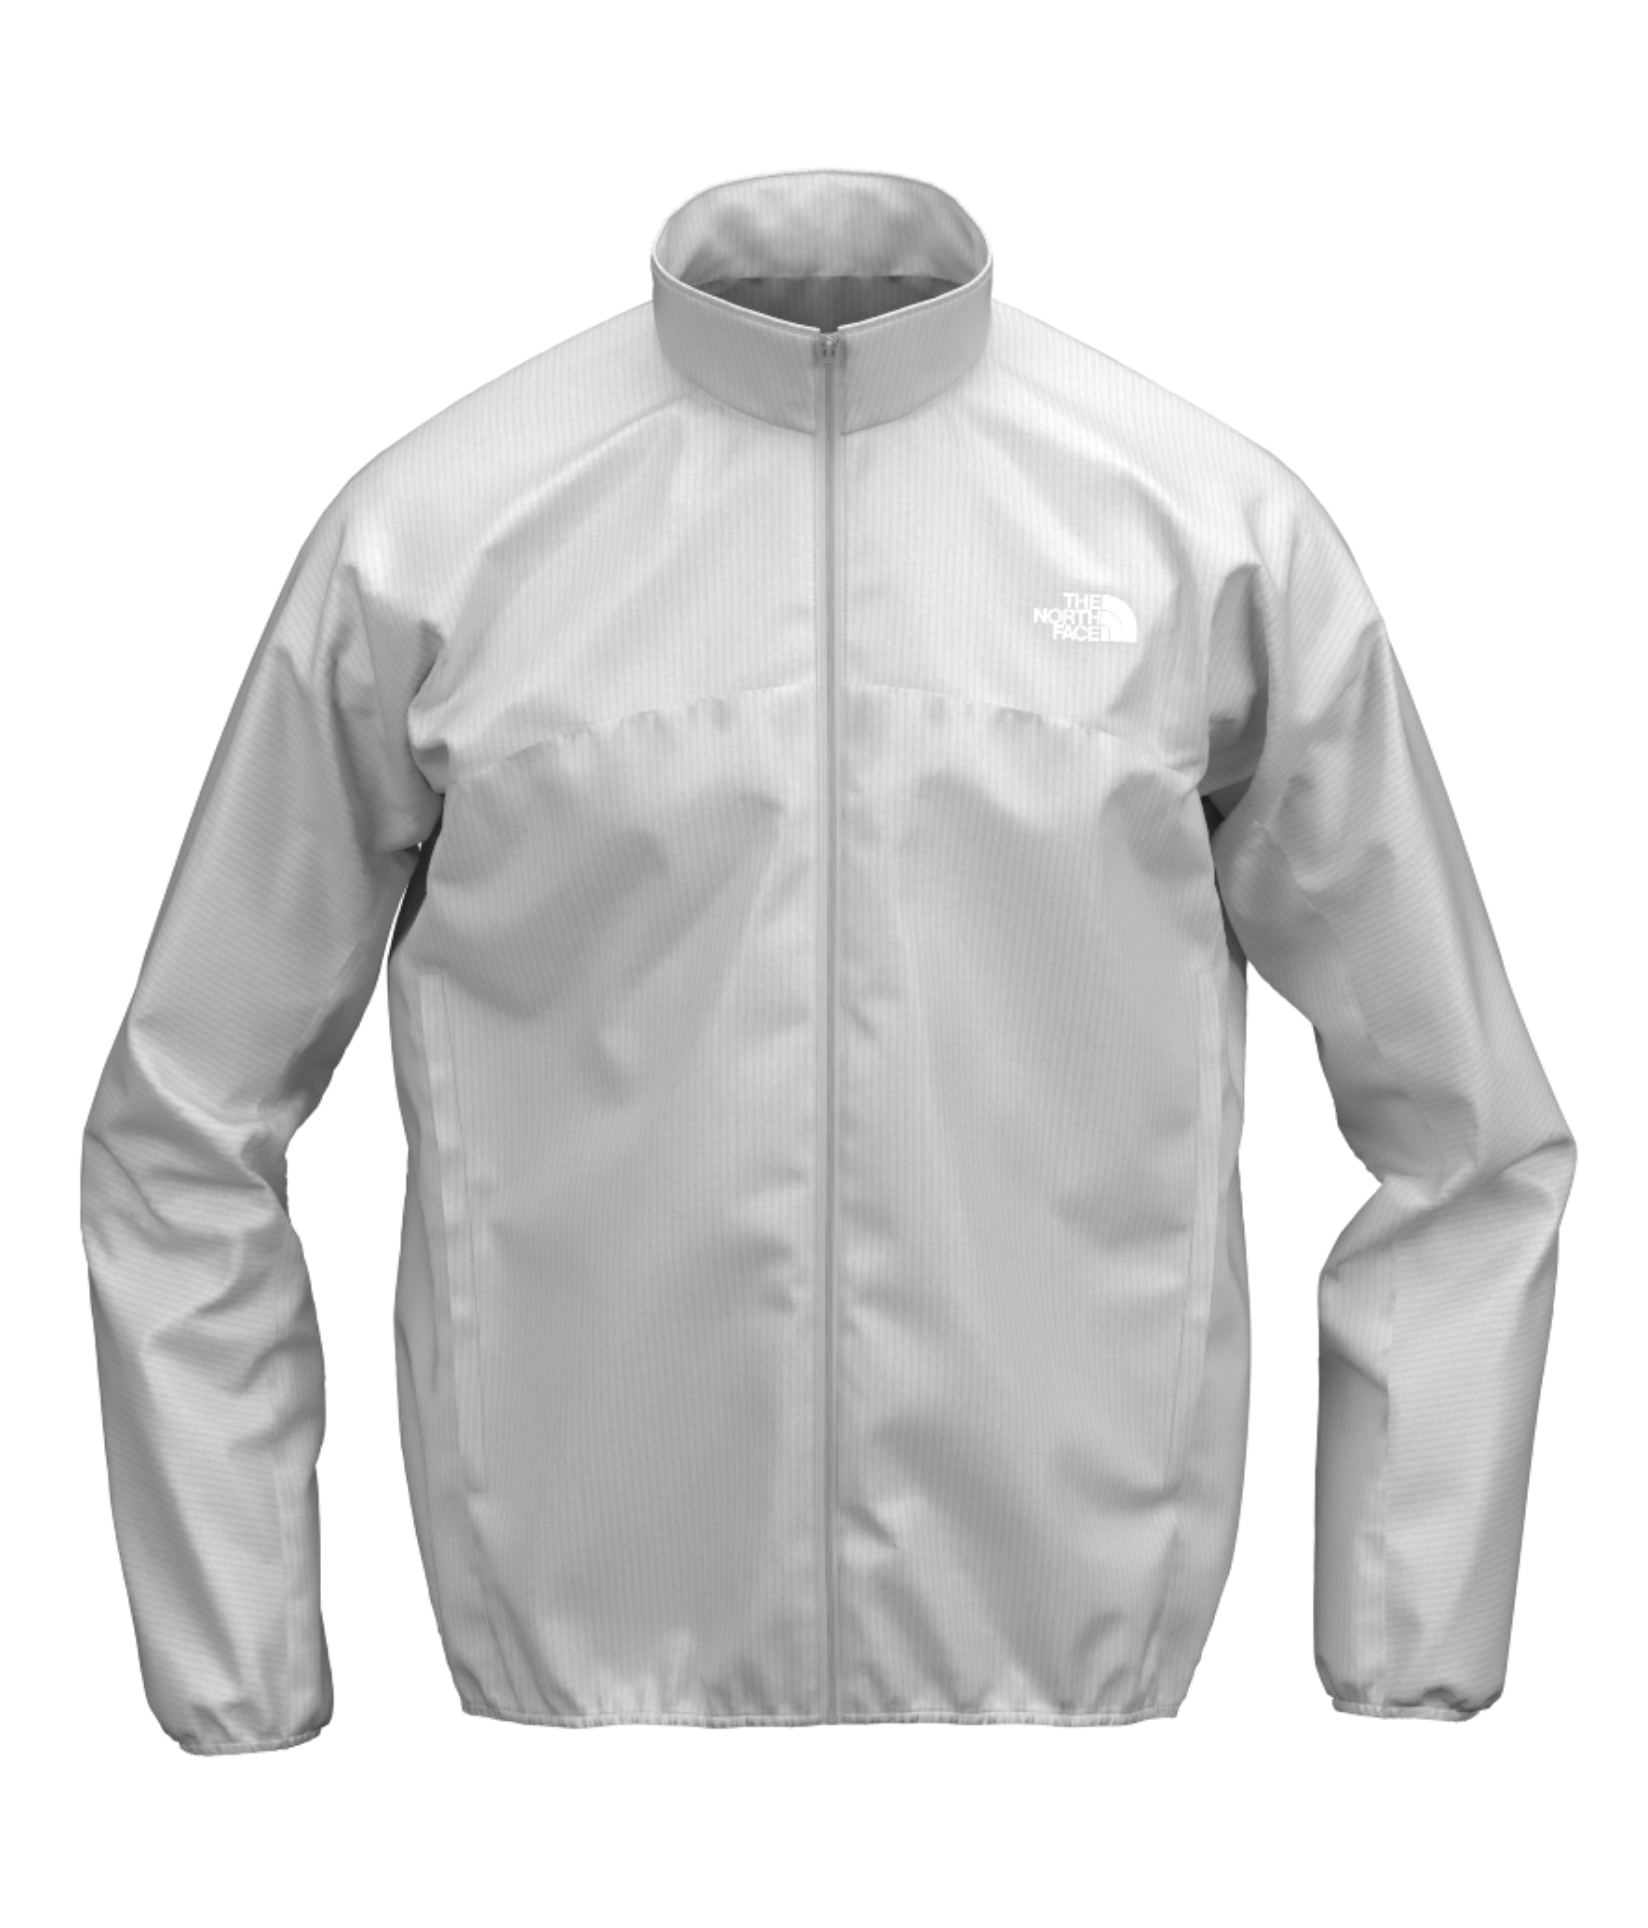 SWALLOWTAIL VENT JACKET | 141 CUSTOM | THE NORTH FACE LAB - GOLDWIN